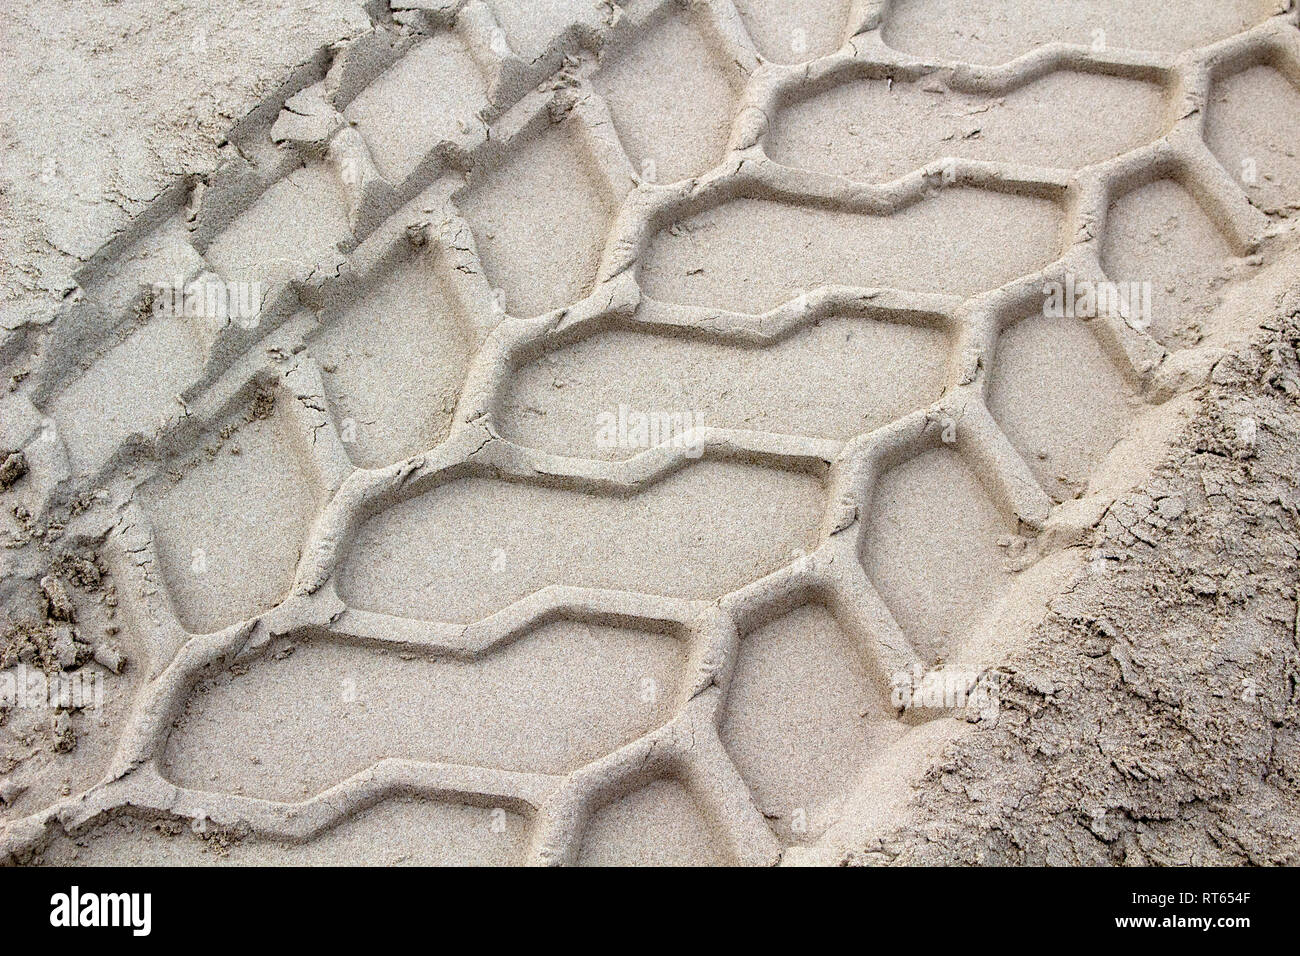 Close-up image showing the texture of tyre marks in the sand Stock Photo